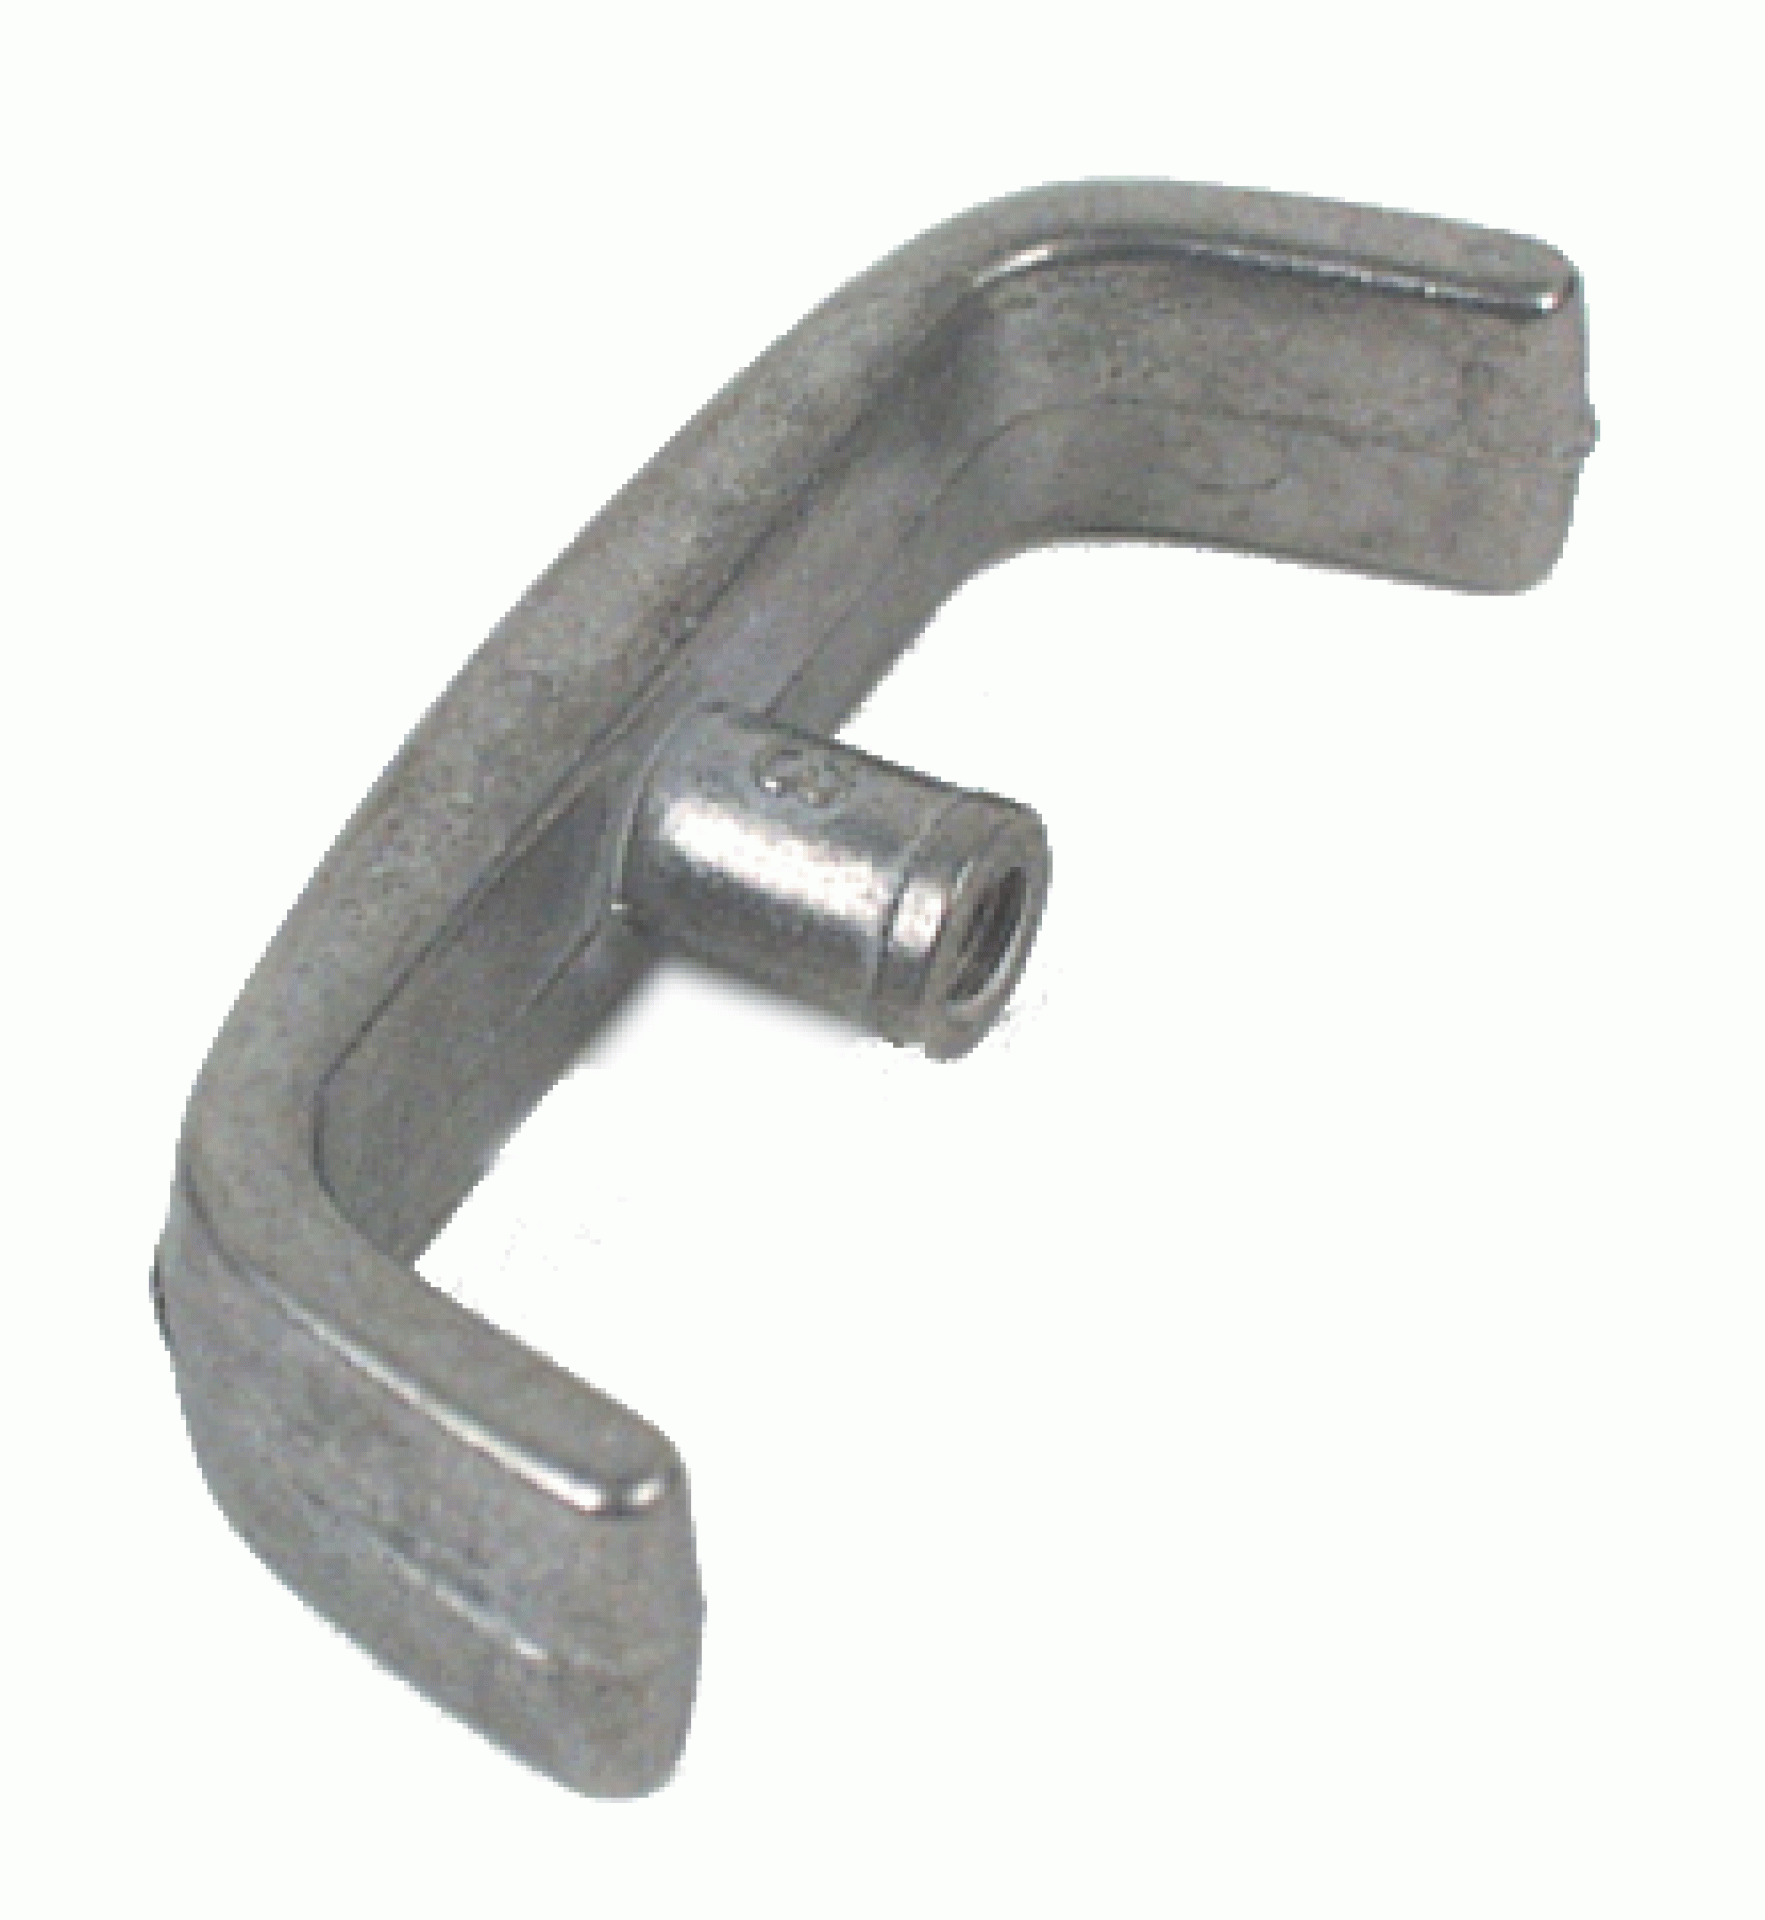 VALTERRA PRODUCTS INC. | T1003-6MVP | VALVE ACCESSORIES - CARDED METAL VALVE HANDLE